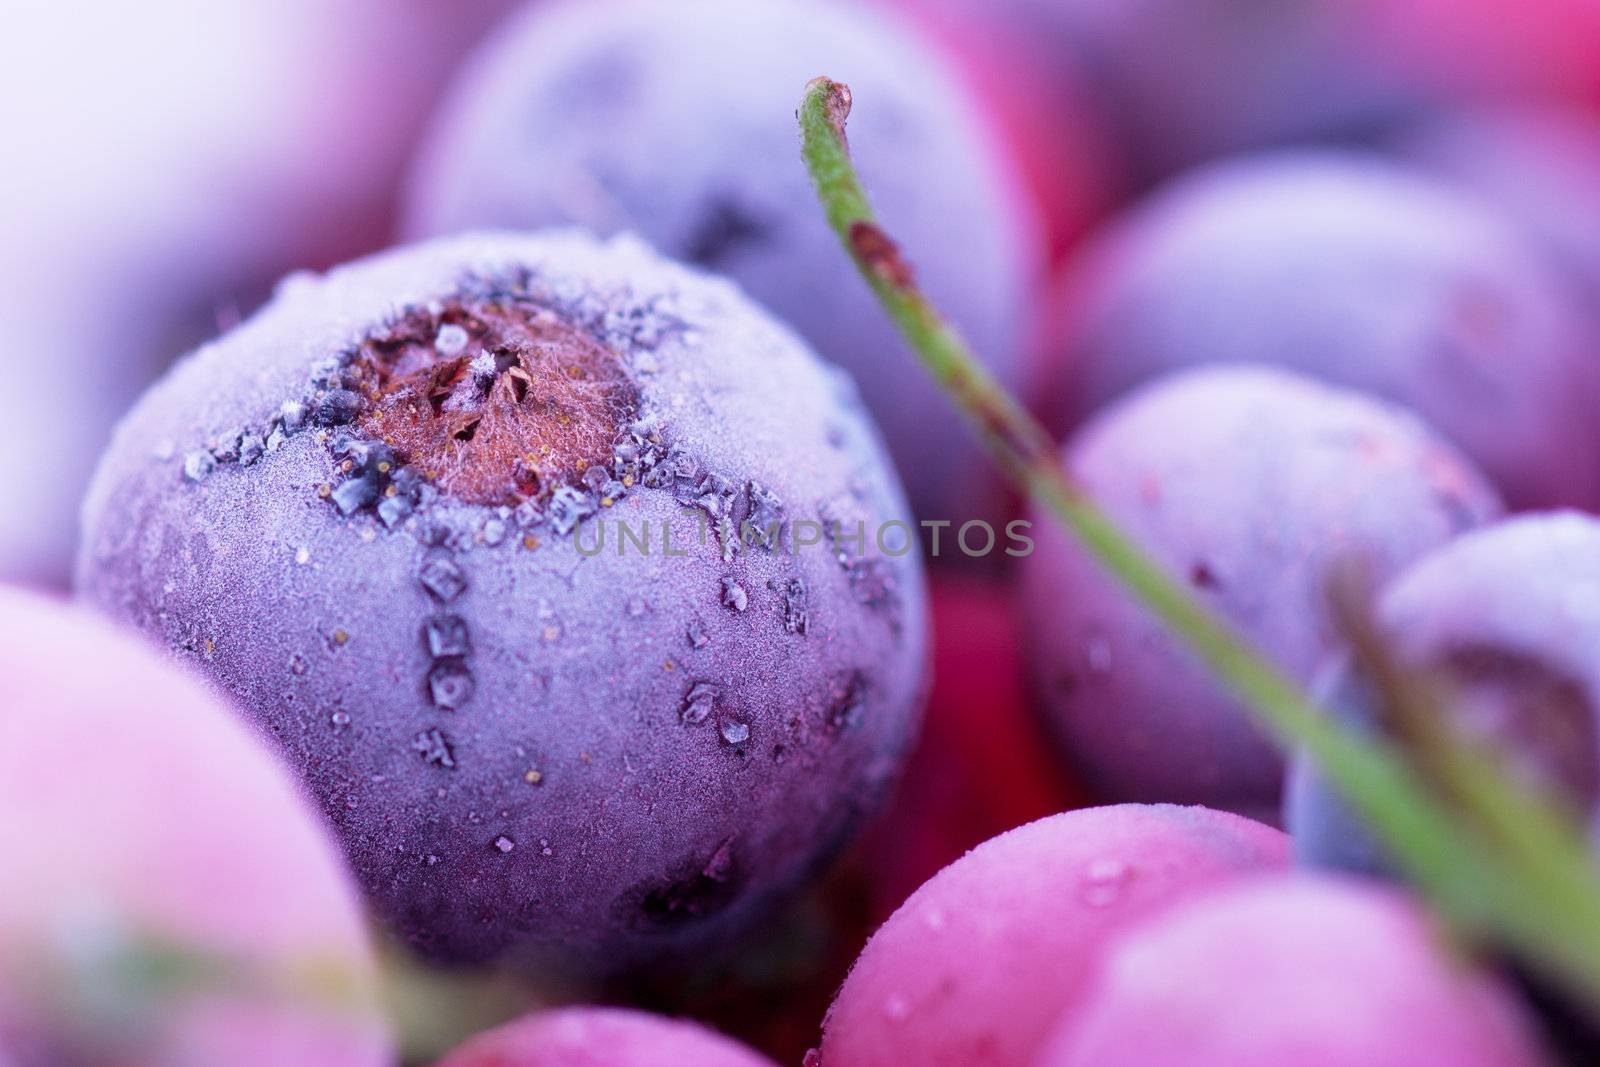 Frozen berries by AGorohov